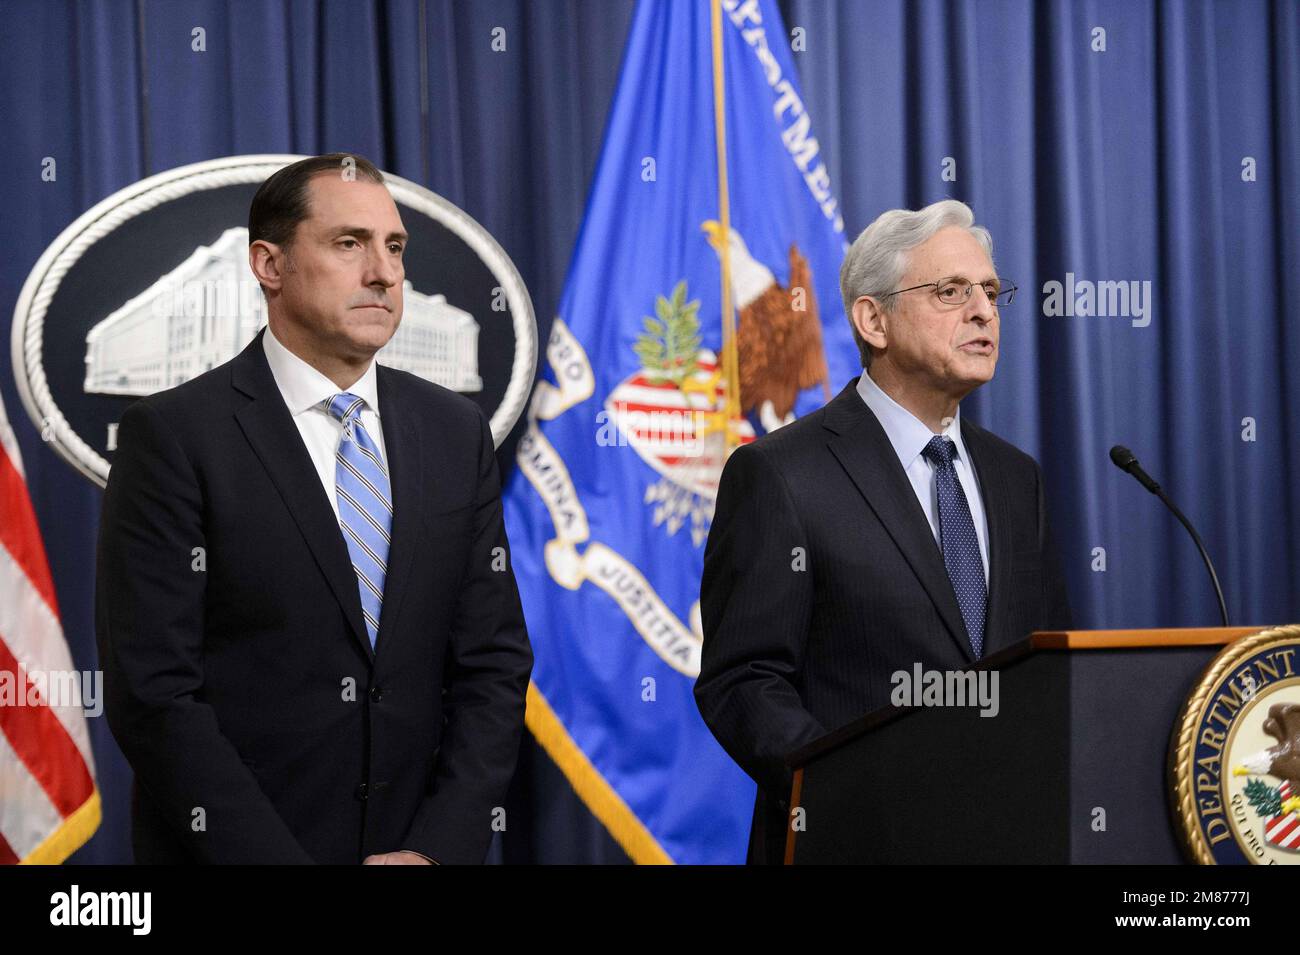 Washington, United States. 12th Jan, 2023. Attorney General Merrick Garland is joined by U.S. Attorney for the Northern District of Illinois John Lausch for a press conference at the Department of Justice in Washington, DC on Thursday, January 12, 2023 to announce the appointment of U.S. Attorney for the District of Maryland Robert Hurr as Special Counsel to investigate the discovery of classified documents held by President Joe Biden at his home office. Photo by Bonnie Cash/UPI Credit: UPI/Alamy Live News Stock Photo